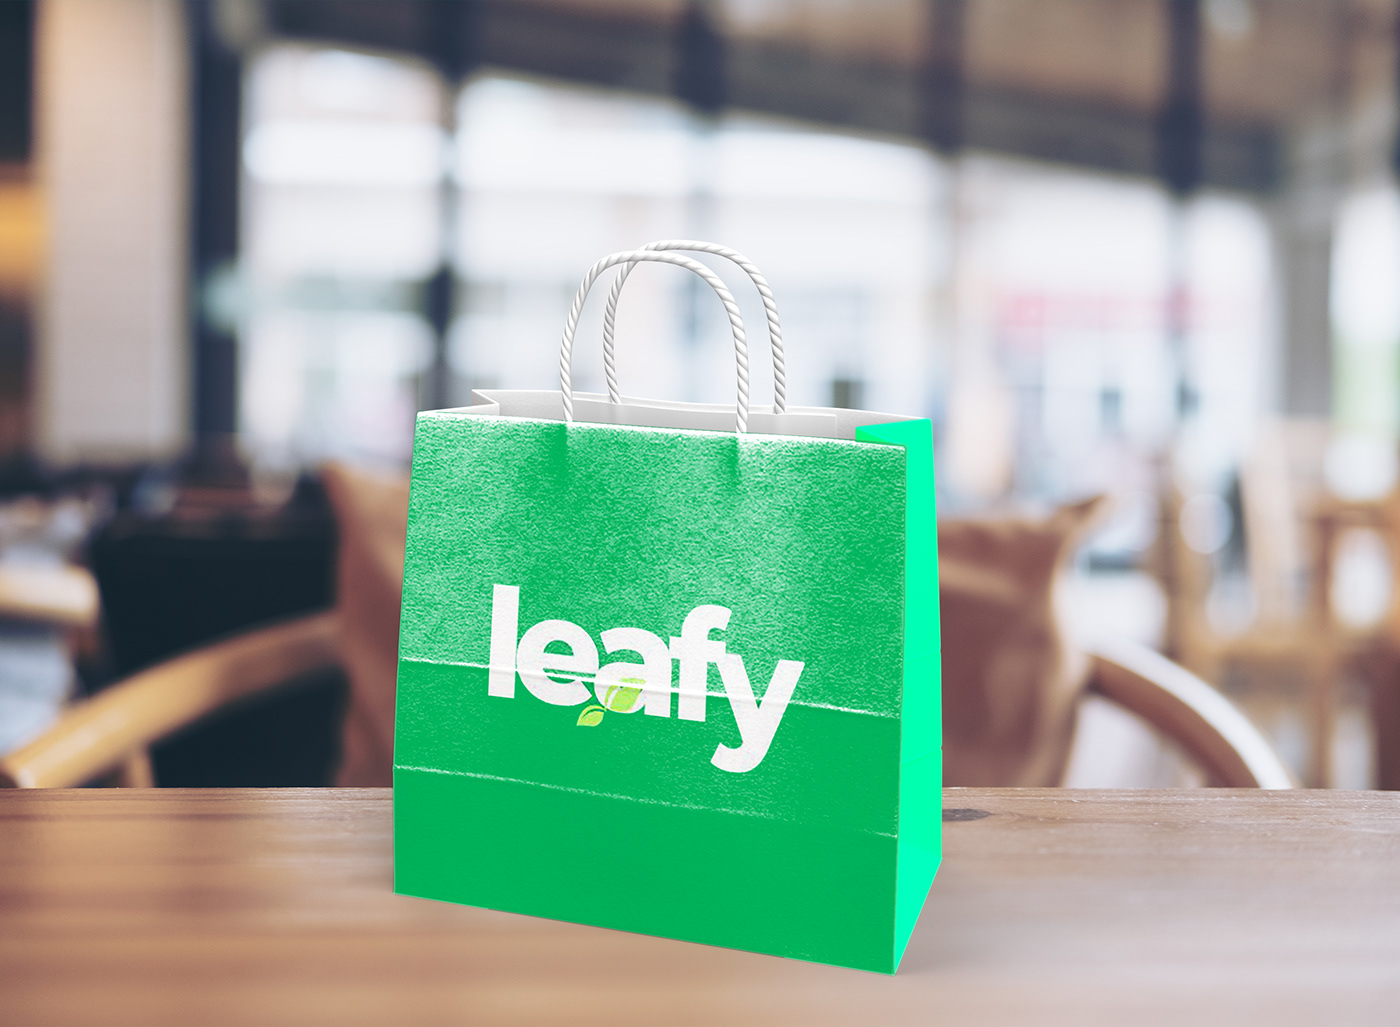 Leafy is the company which sells products including food products, cosmetics and others.